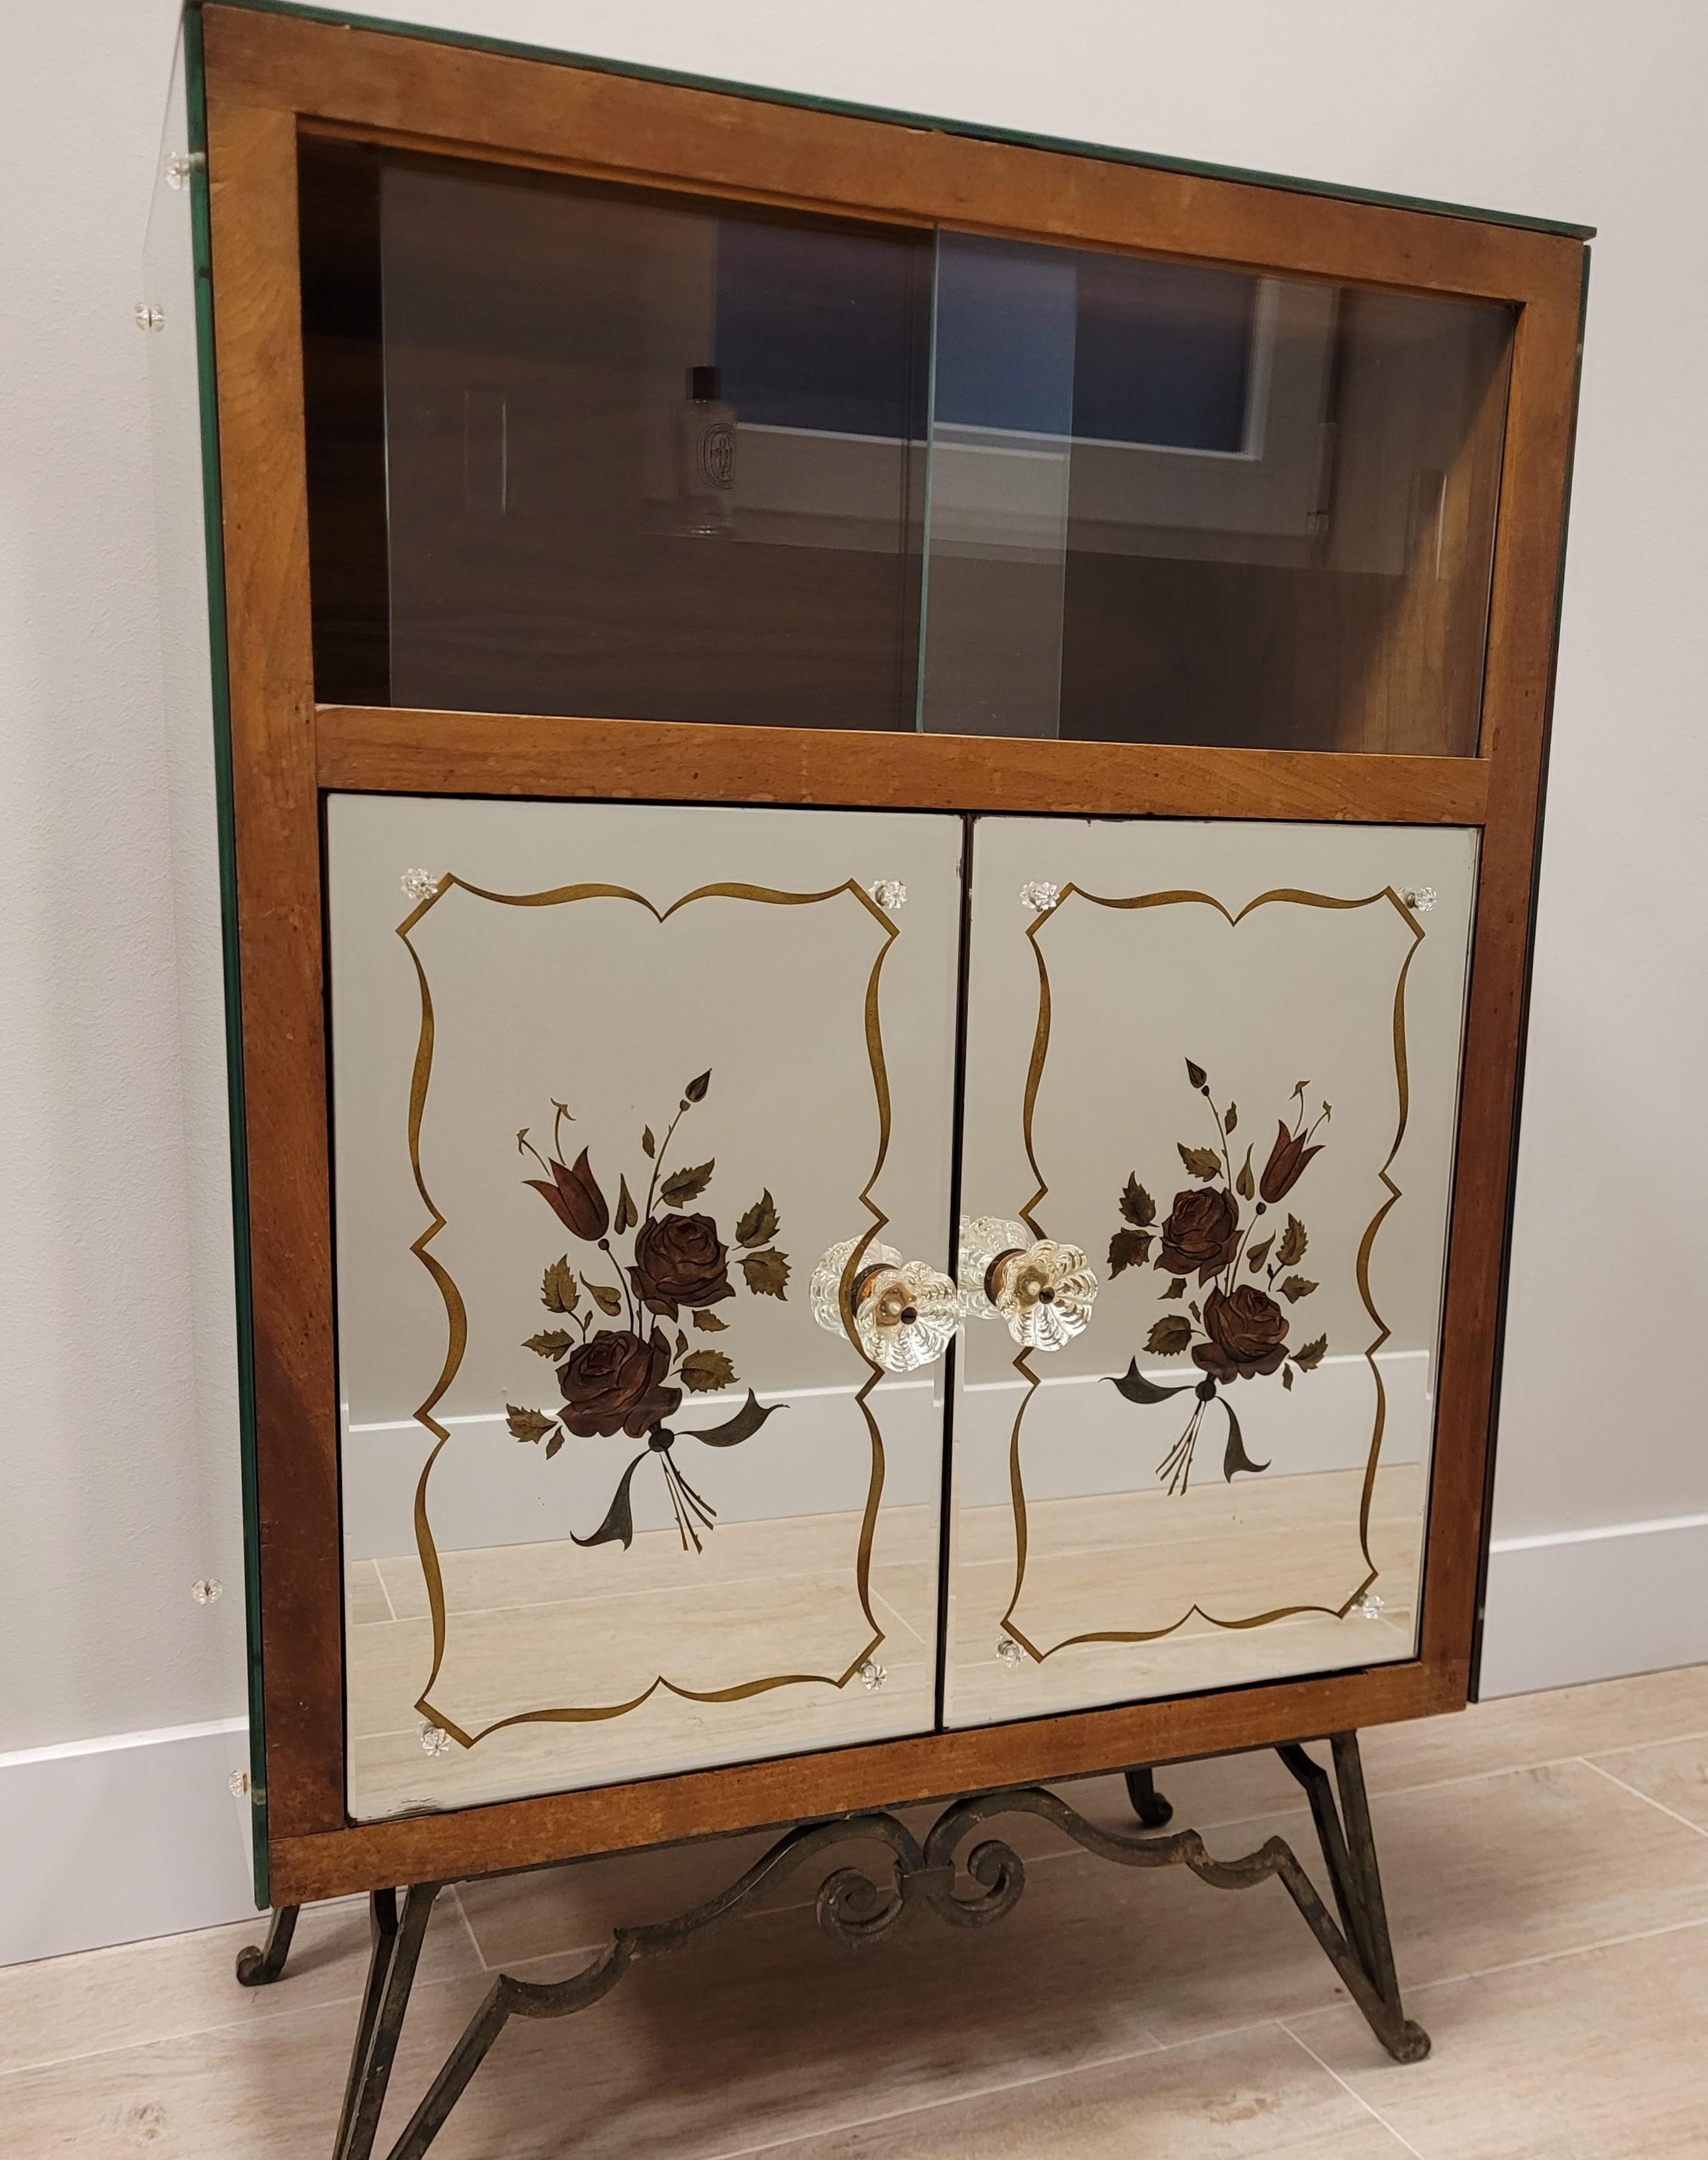 Amazing and gorgeous Venetian auxiliary cabinet (cabinet) from the 40s made of églomisé glass on wood, and framed and decorated on the front by means of precious floral designs. The interior structure has two parts: an upper shelf made up of two